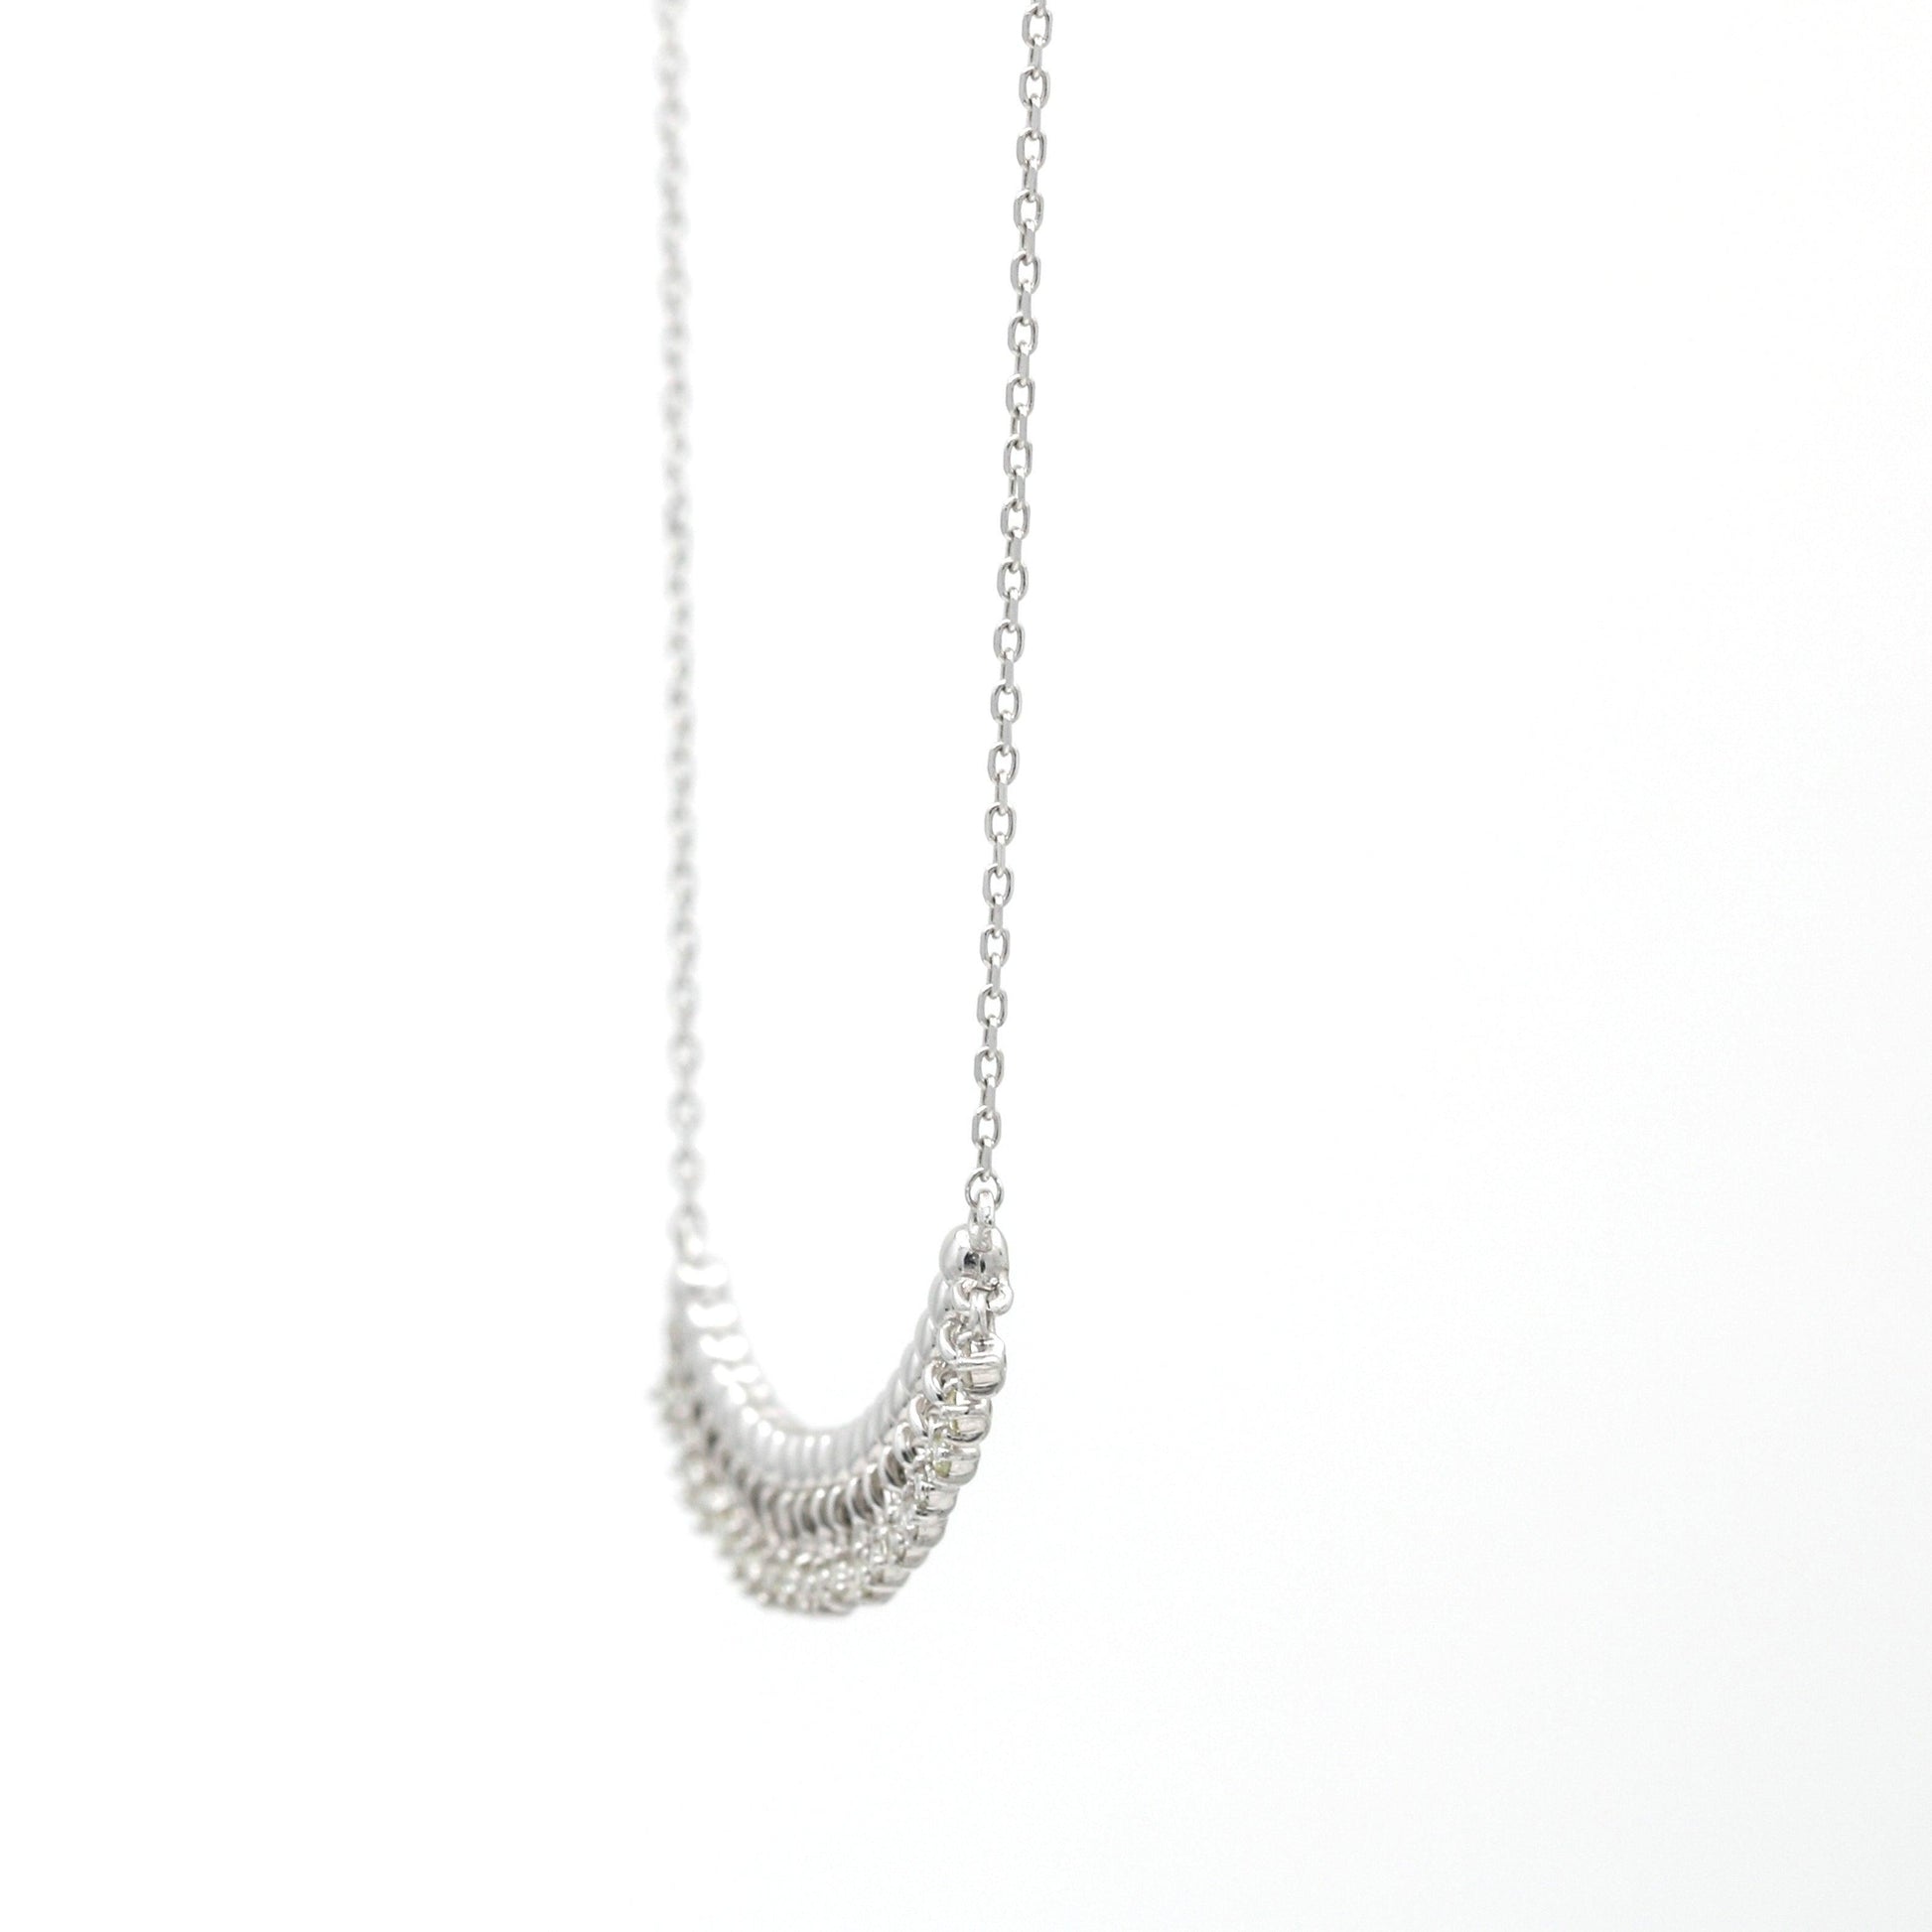 Women's Cable Smile Bar with Dangling Diamonds Necklace in 14k White Gold - 31 Jewels Inc.